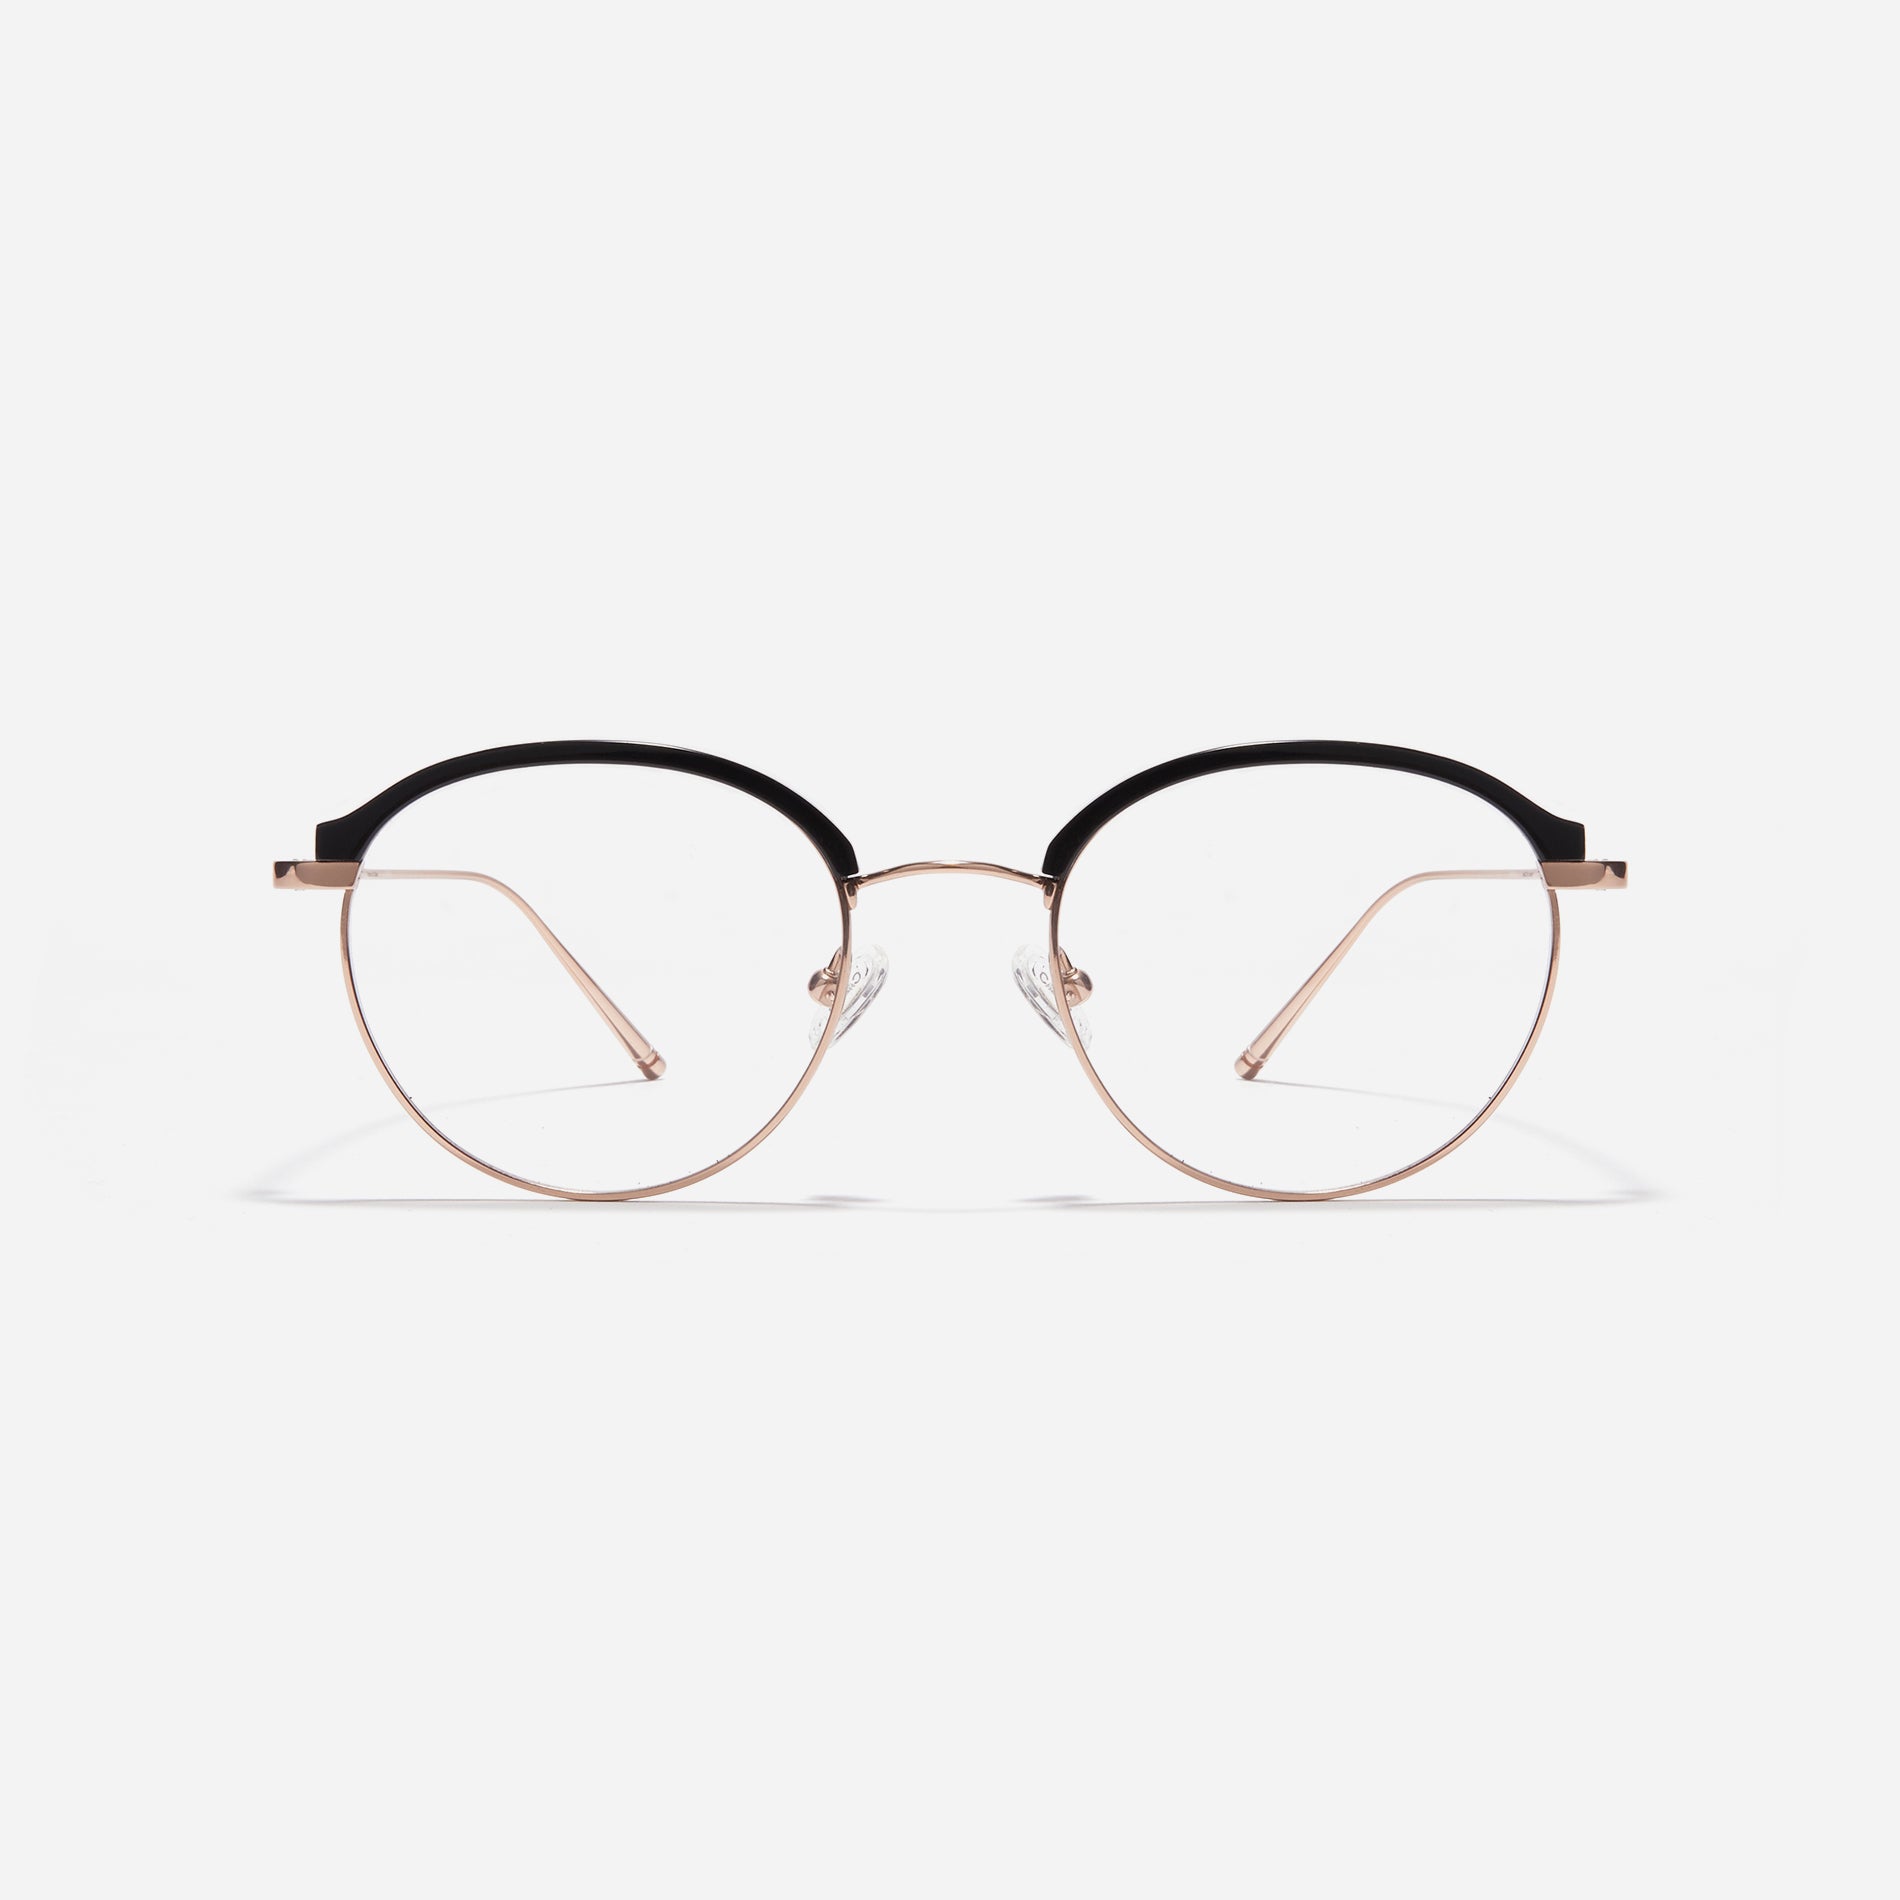 Round-shaped combination eyeglasses with a semi-rimless design. Plia R design incorporates dual lining on the tips to prevent slipping and ensure a consistently comfortable wearing experience.